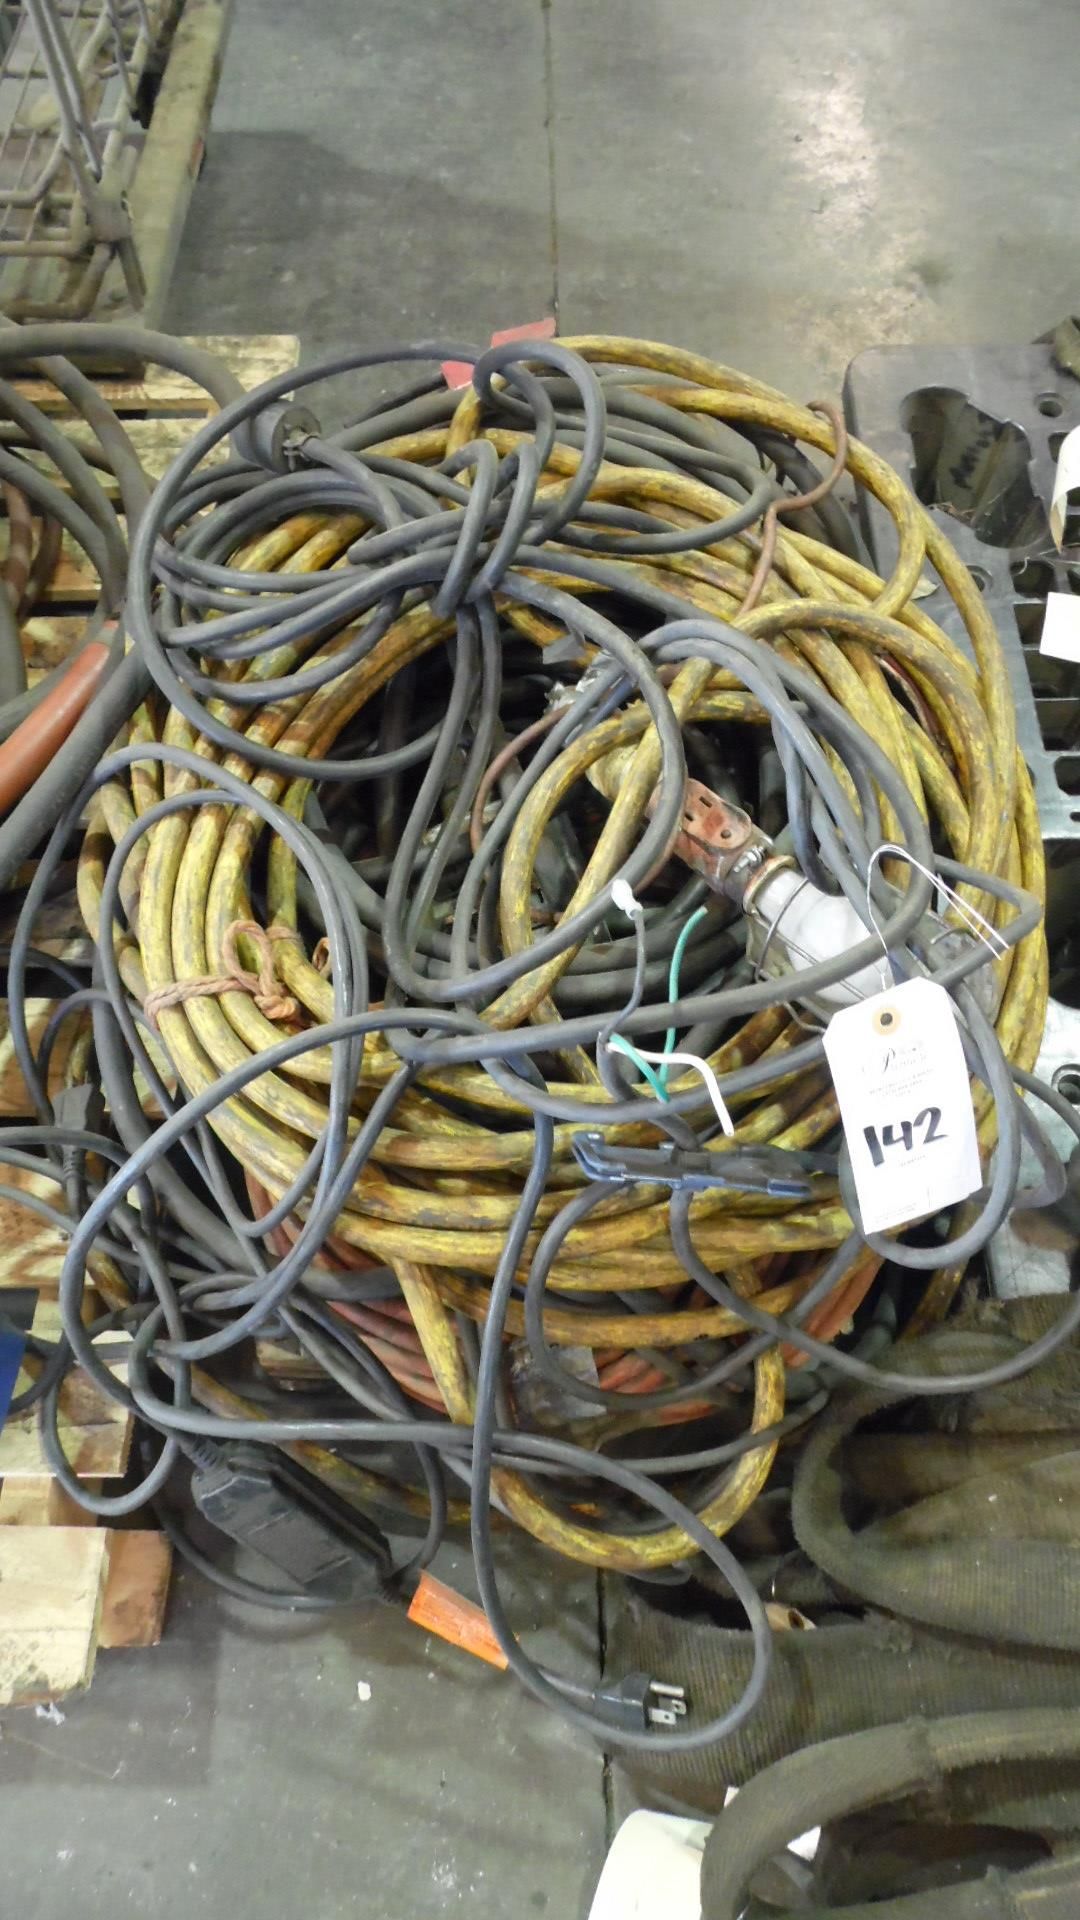 ASSORTED ELECTRIC CORDS